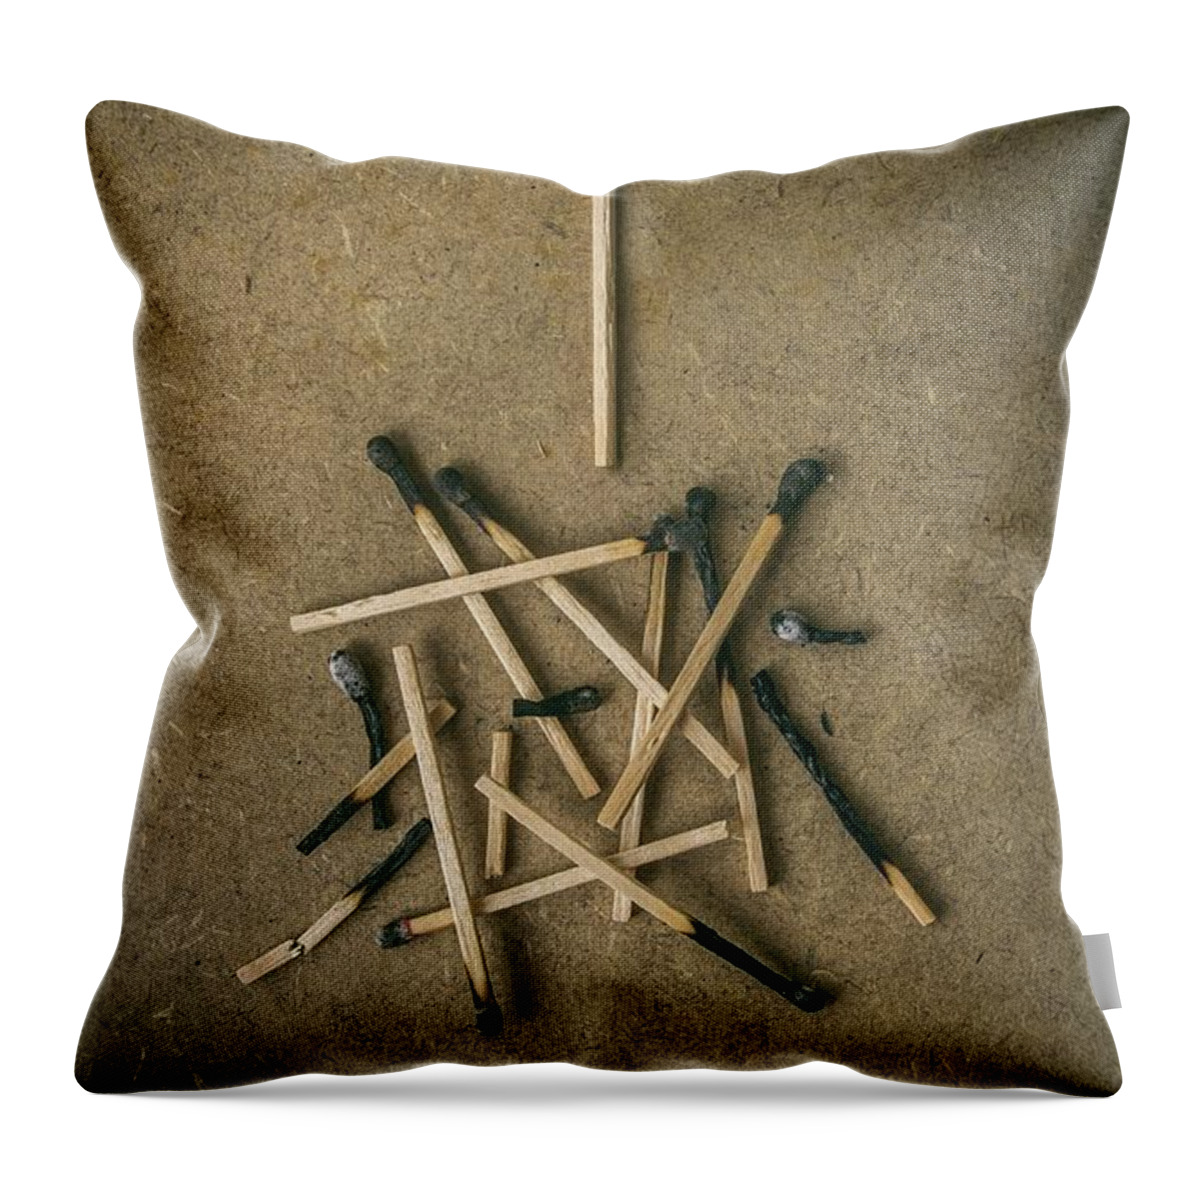 Match Throw Pillow featuring the photograph Burnt Matches #2 by Carlos Caetano